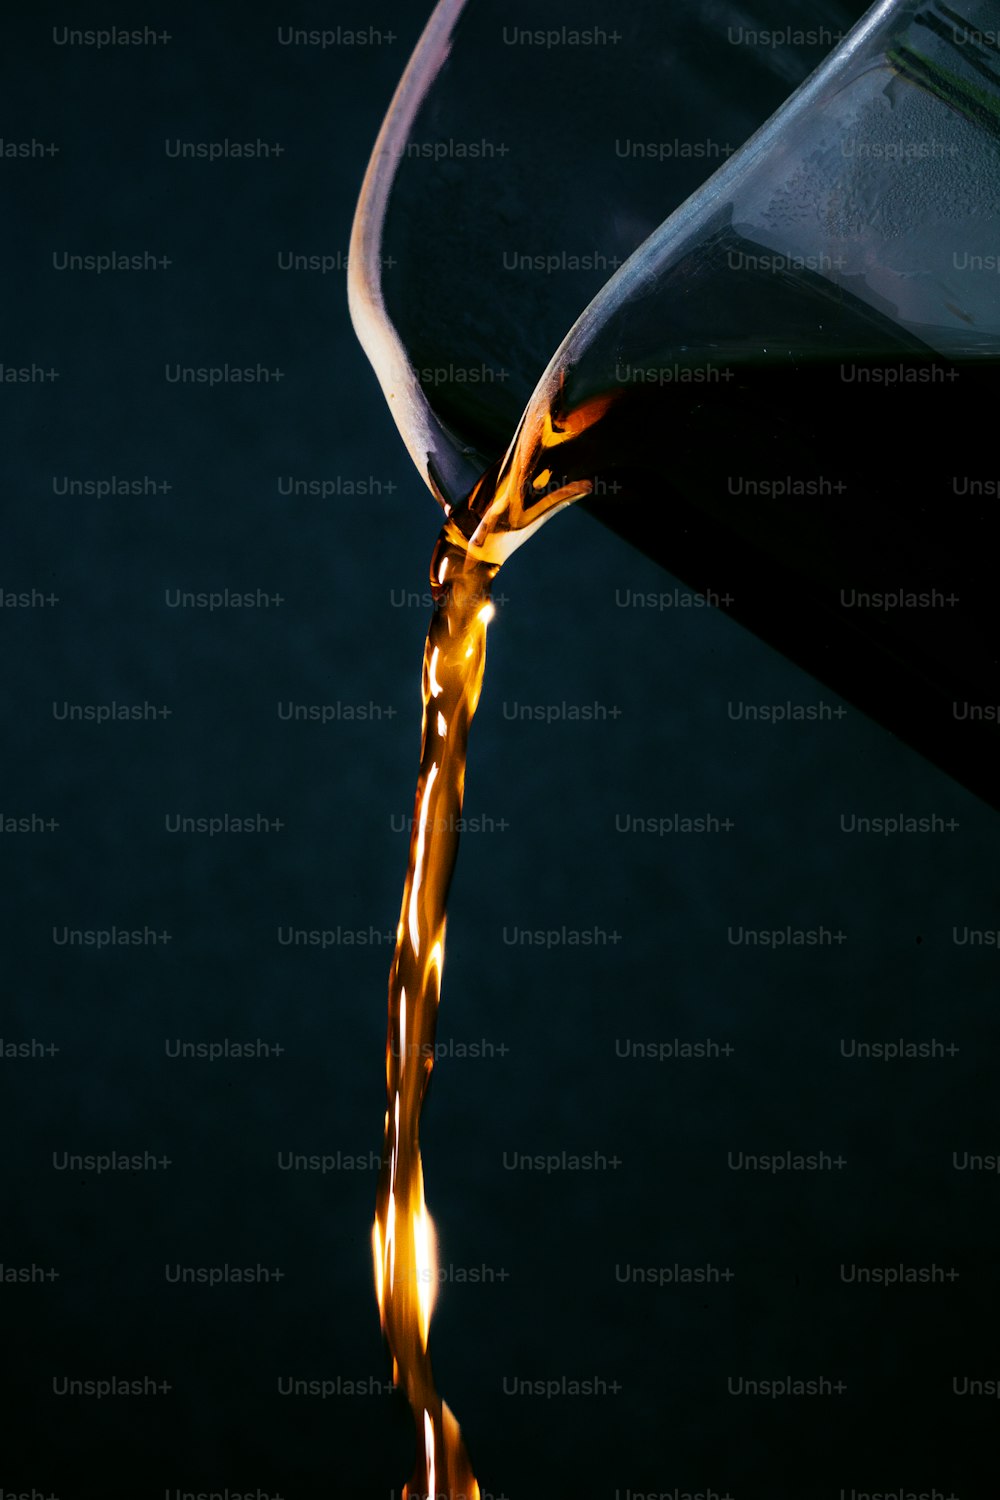 a glass of liquid being poured into it